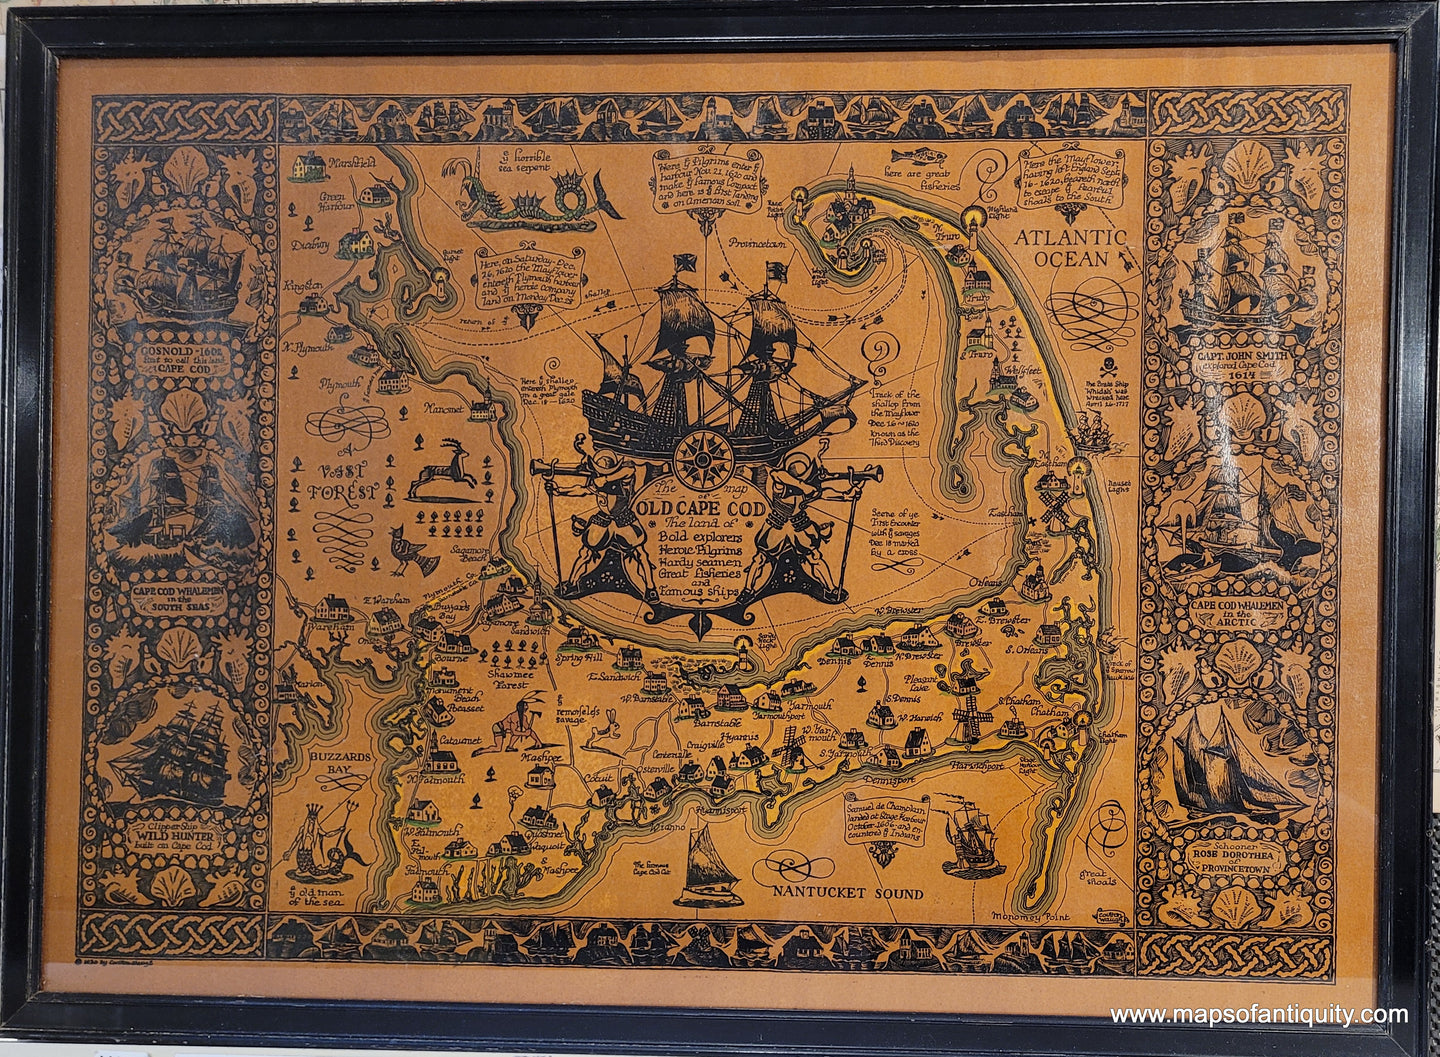 Hand-Colored-Framed-Antique-Map-The-Map-of-Old-Cape-Cod-The land of Bold Explorers, Heroic Pilgrims, Hardy Seamen, Great Fisheries and Famous Ships-Massachusetts-Cape-Cod-and-Islands-1930-Coulton-Waugh-Maps-Of-Antiquity